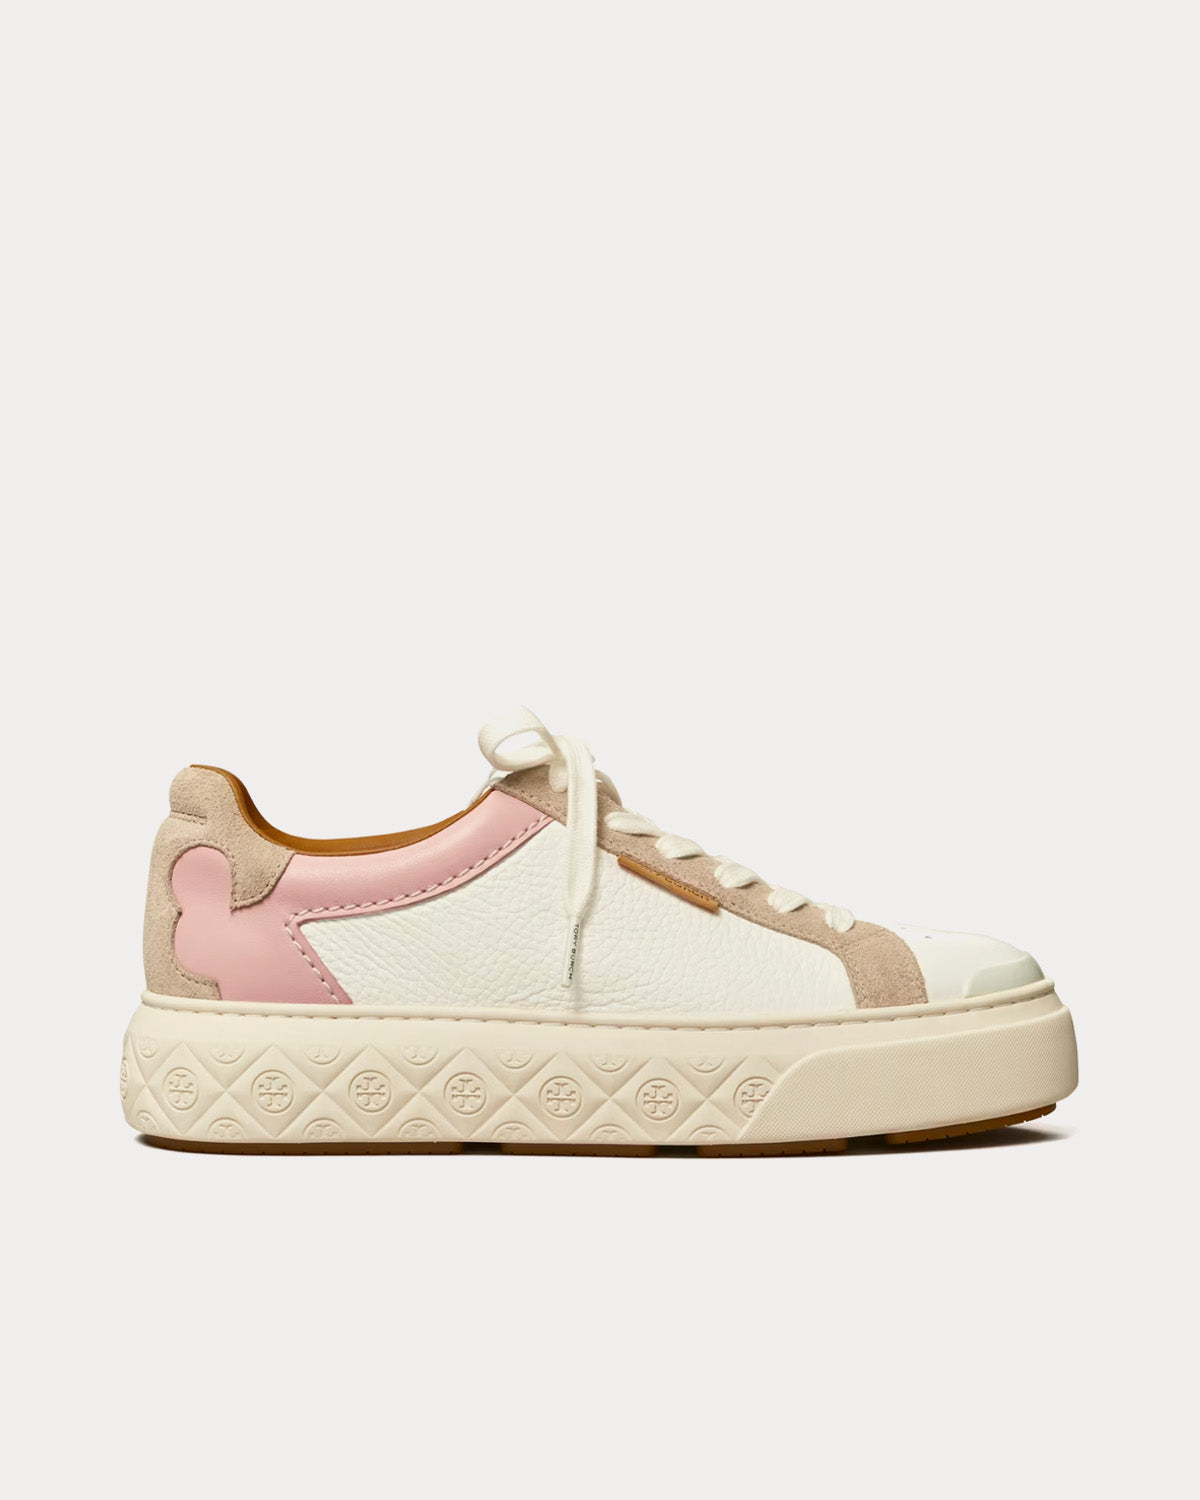 Tory Burch - Ladybug New Ivory / Calcare / Rosa Low Top Sneakers